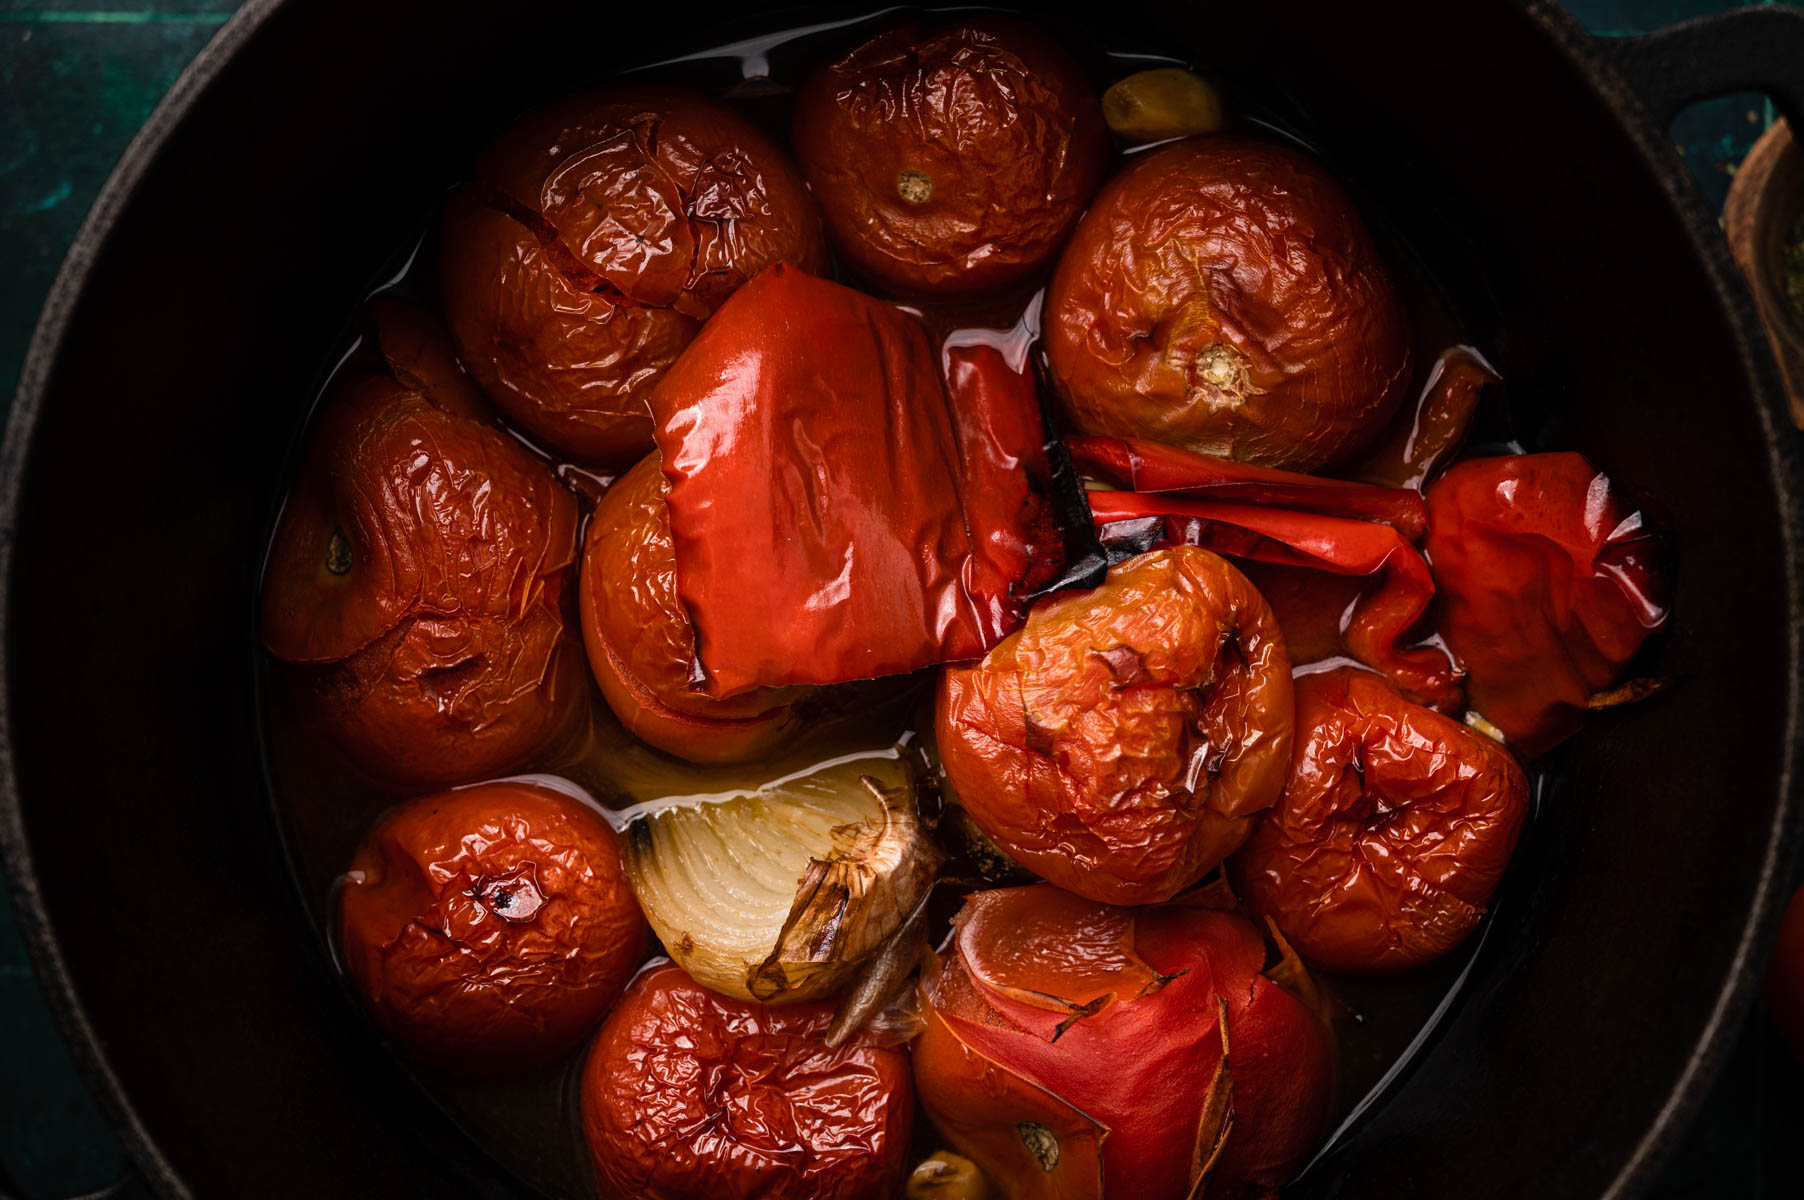 Roasted tomatoes and red peppers in a bowl, with a halved onion visible, all glistening with cooking juices.